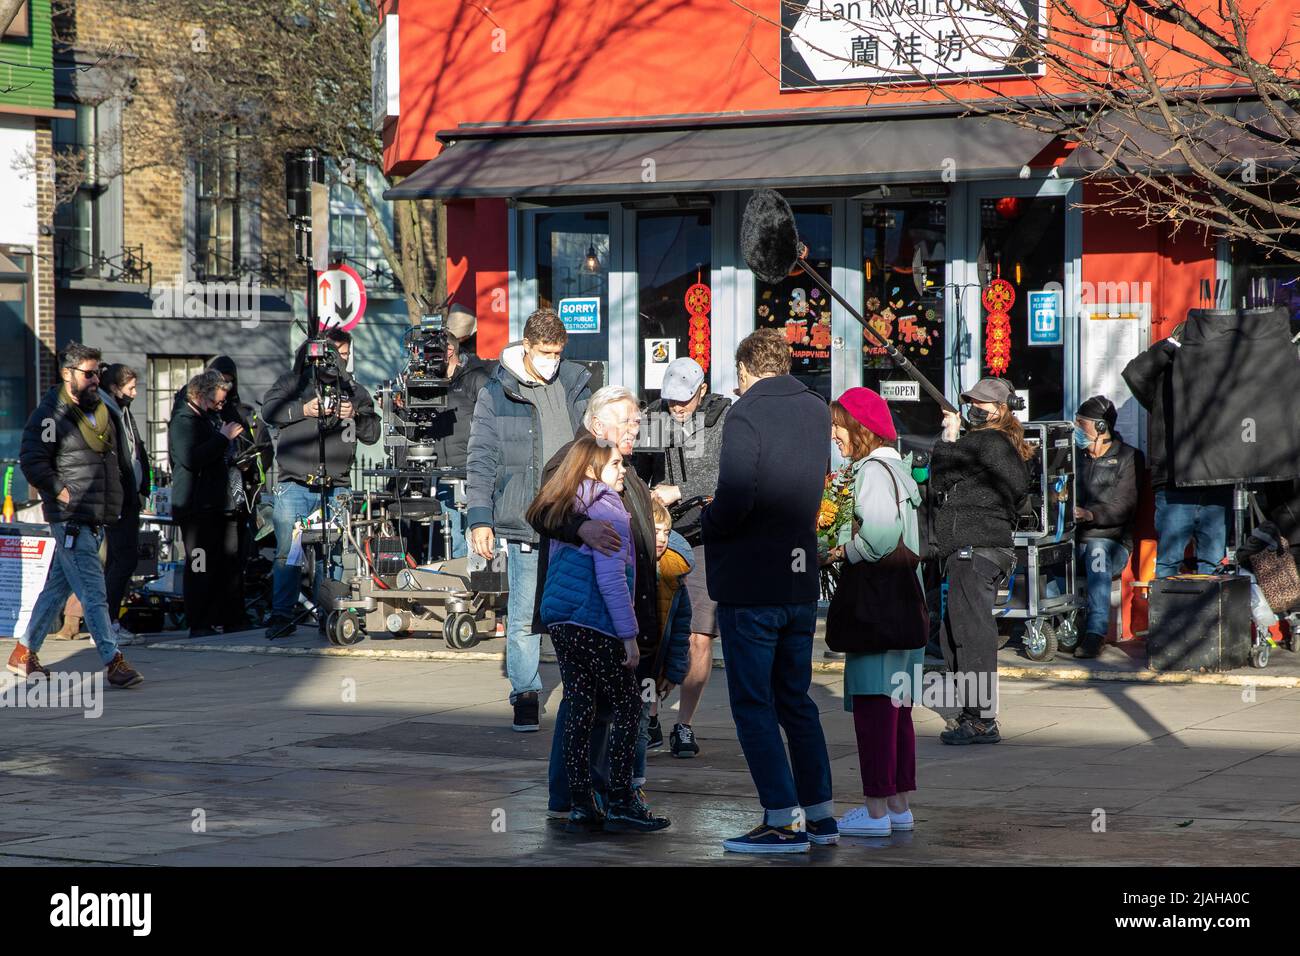 Camden Market, London UK. 12 January 2022. Cast and crew are on set for the filming of Trying TV season 3 for AppleTV+ channel. The two main actors Rafe Spall as Jason and Esther Smith as Nikki lead the action on set. Stock Photo